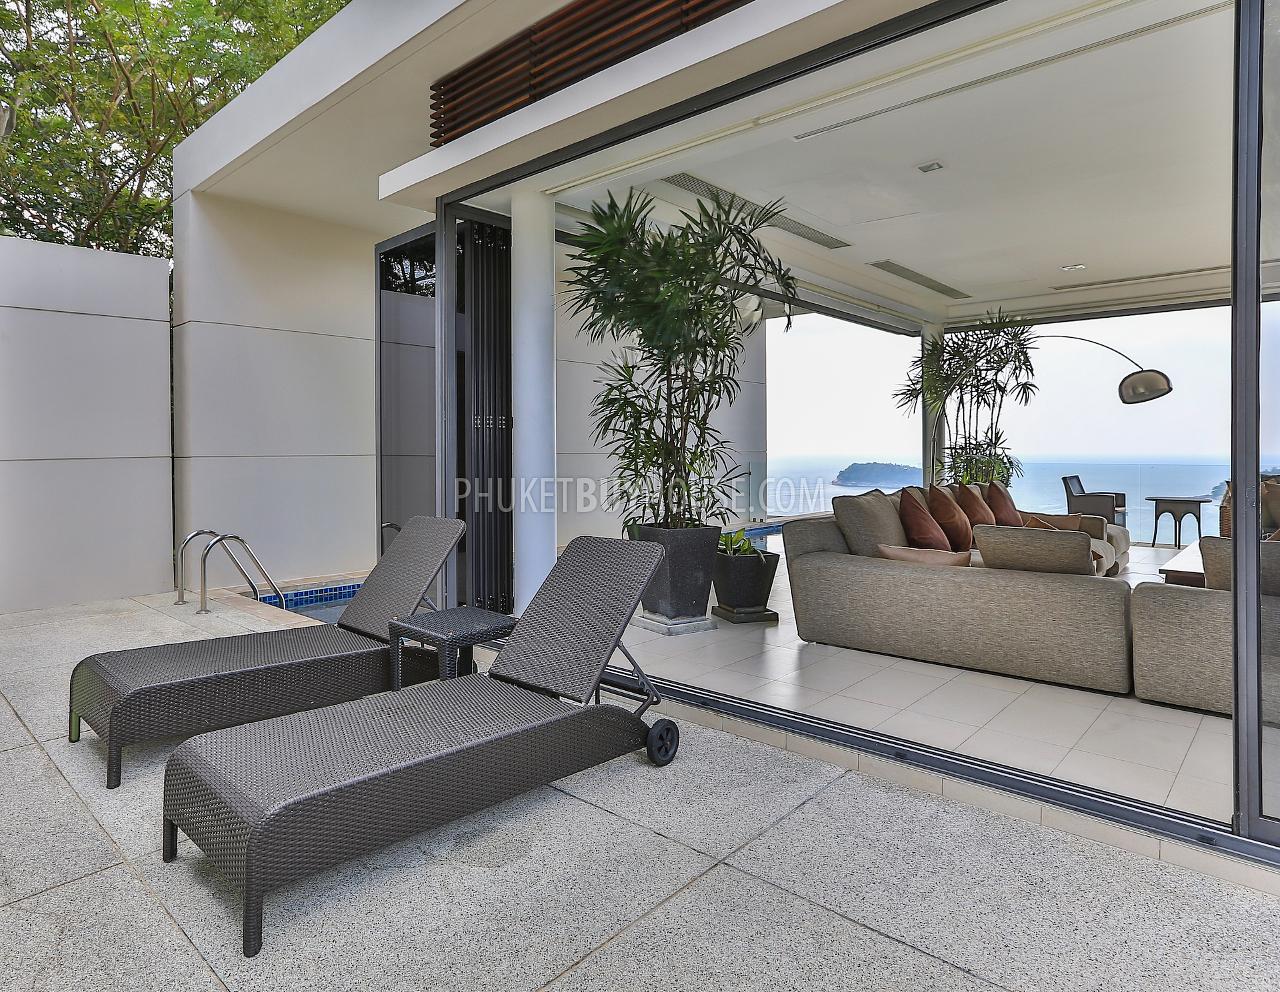 KAT6894: Exclusive Apartments with Pool for Sale in Kata Beach Area. Photo #7